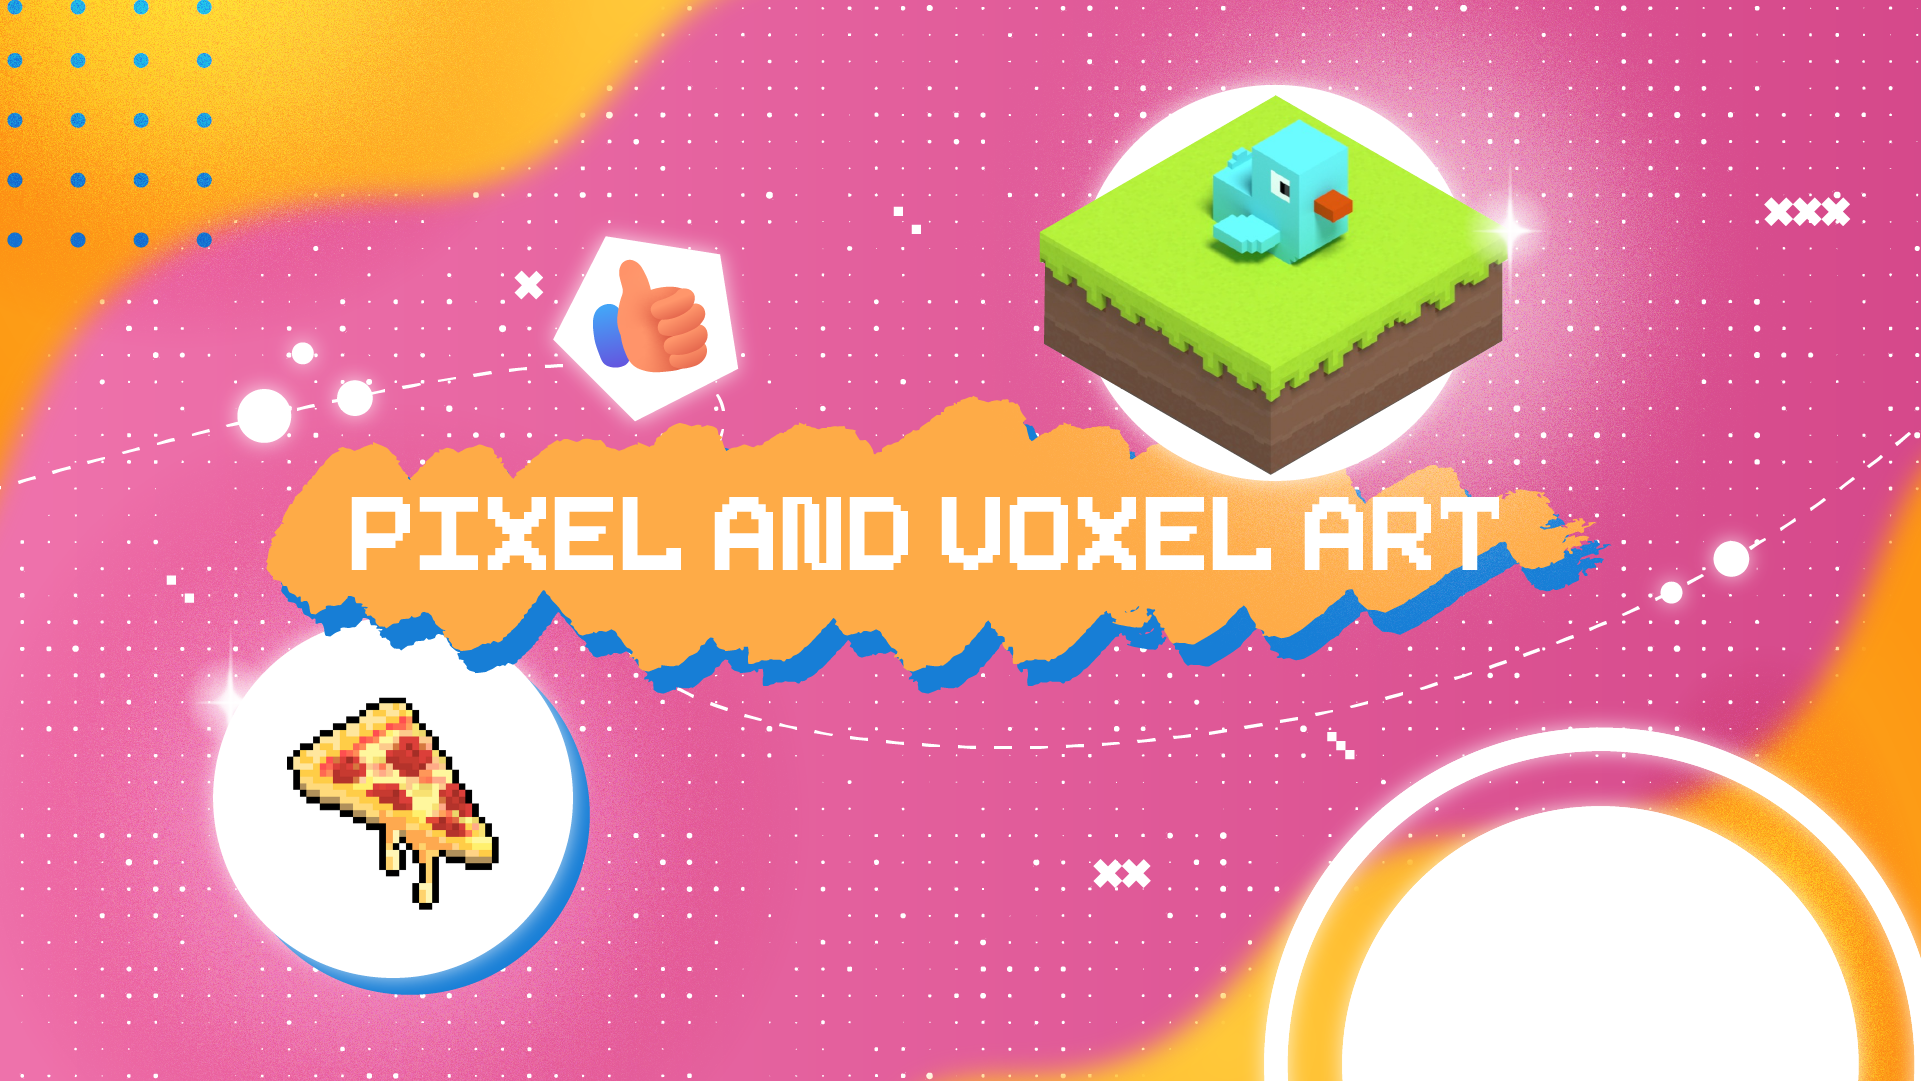 <p>The Ultimate Guide to Pixel &amp; Voxel Art</p>
<p>&nbsp;</p>
<p>&nbsp;</p>
<p>&nbsp;</p>
<p>&nbsp;</p>
<p>&nbsp;</p>
<p>&nbsp;</p>
